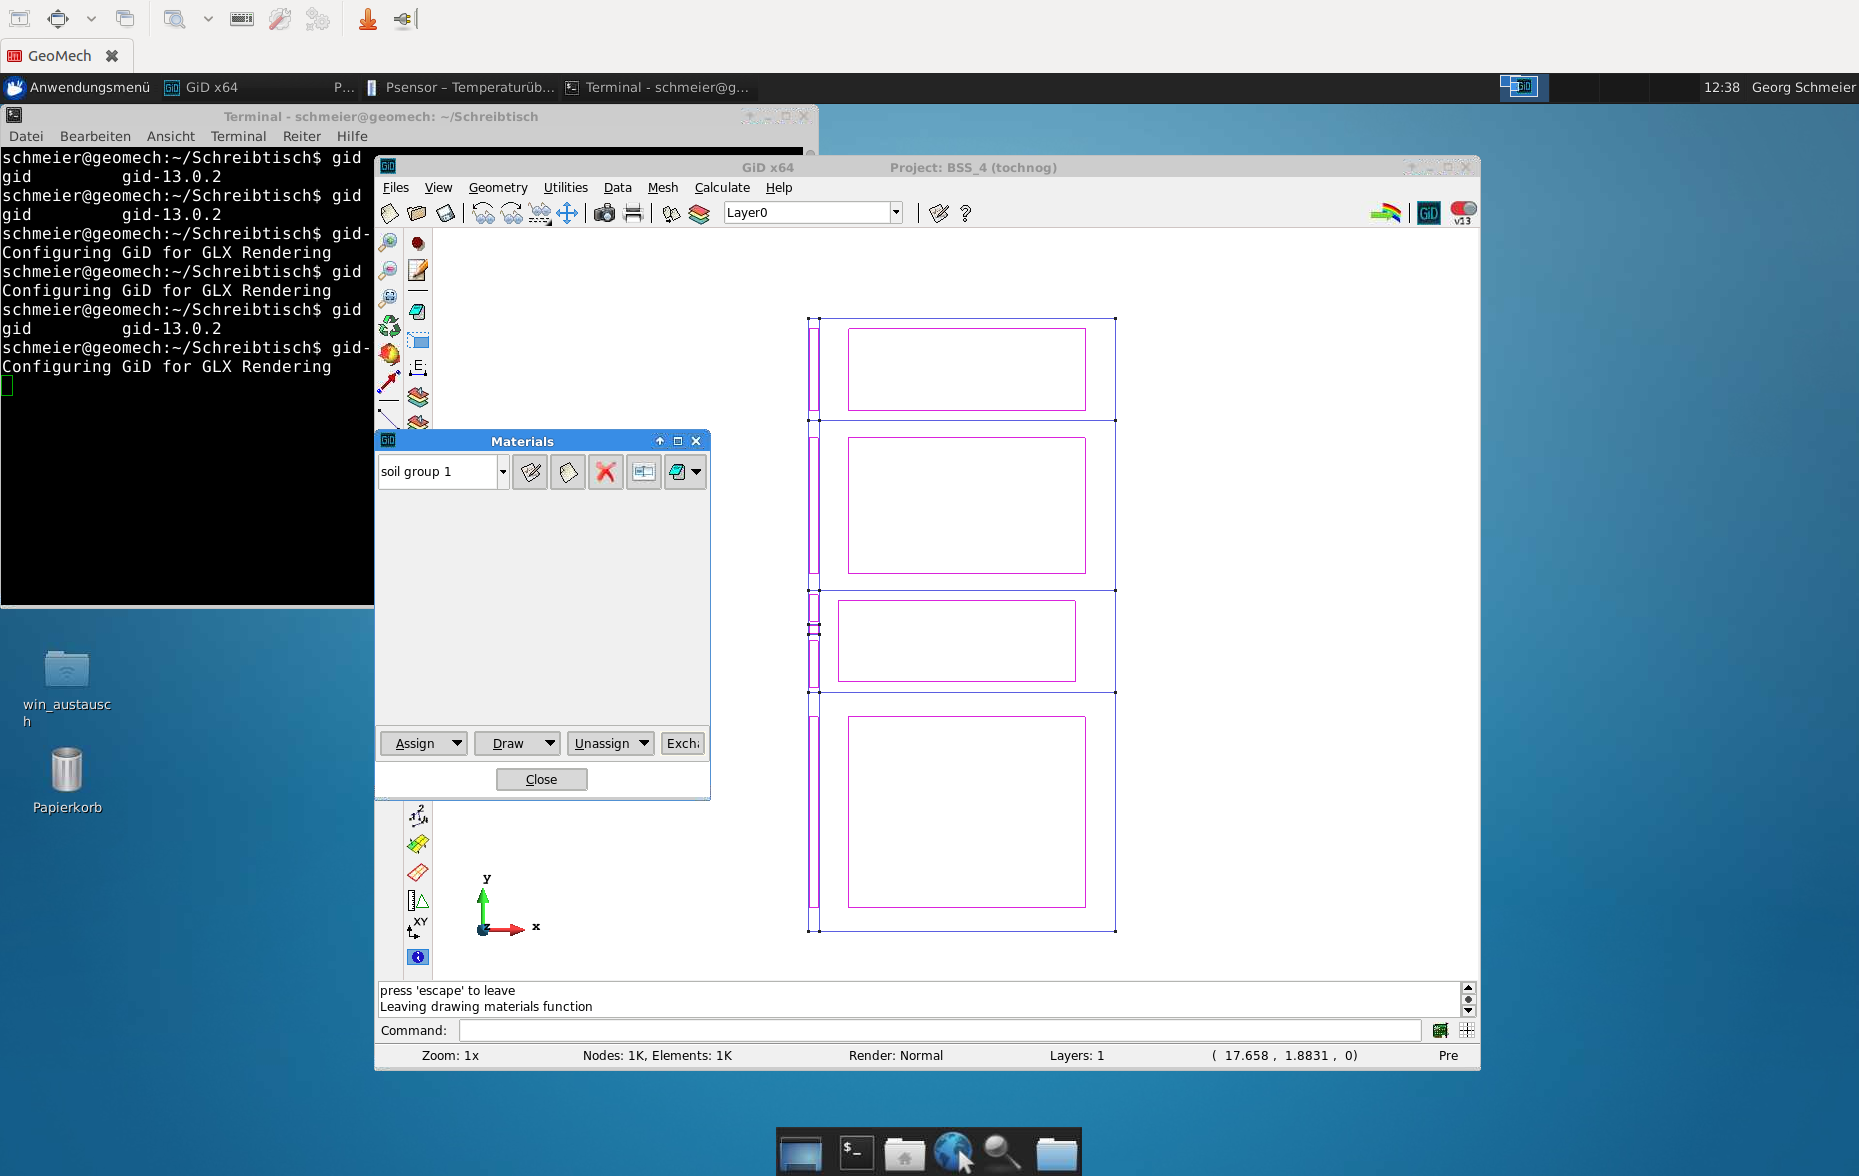 snapshot of the Material window in GiD